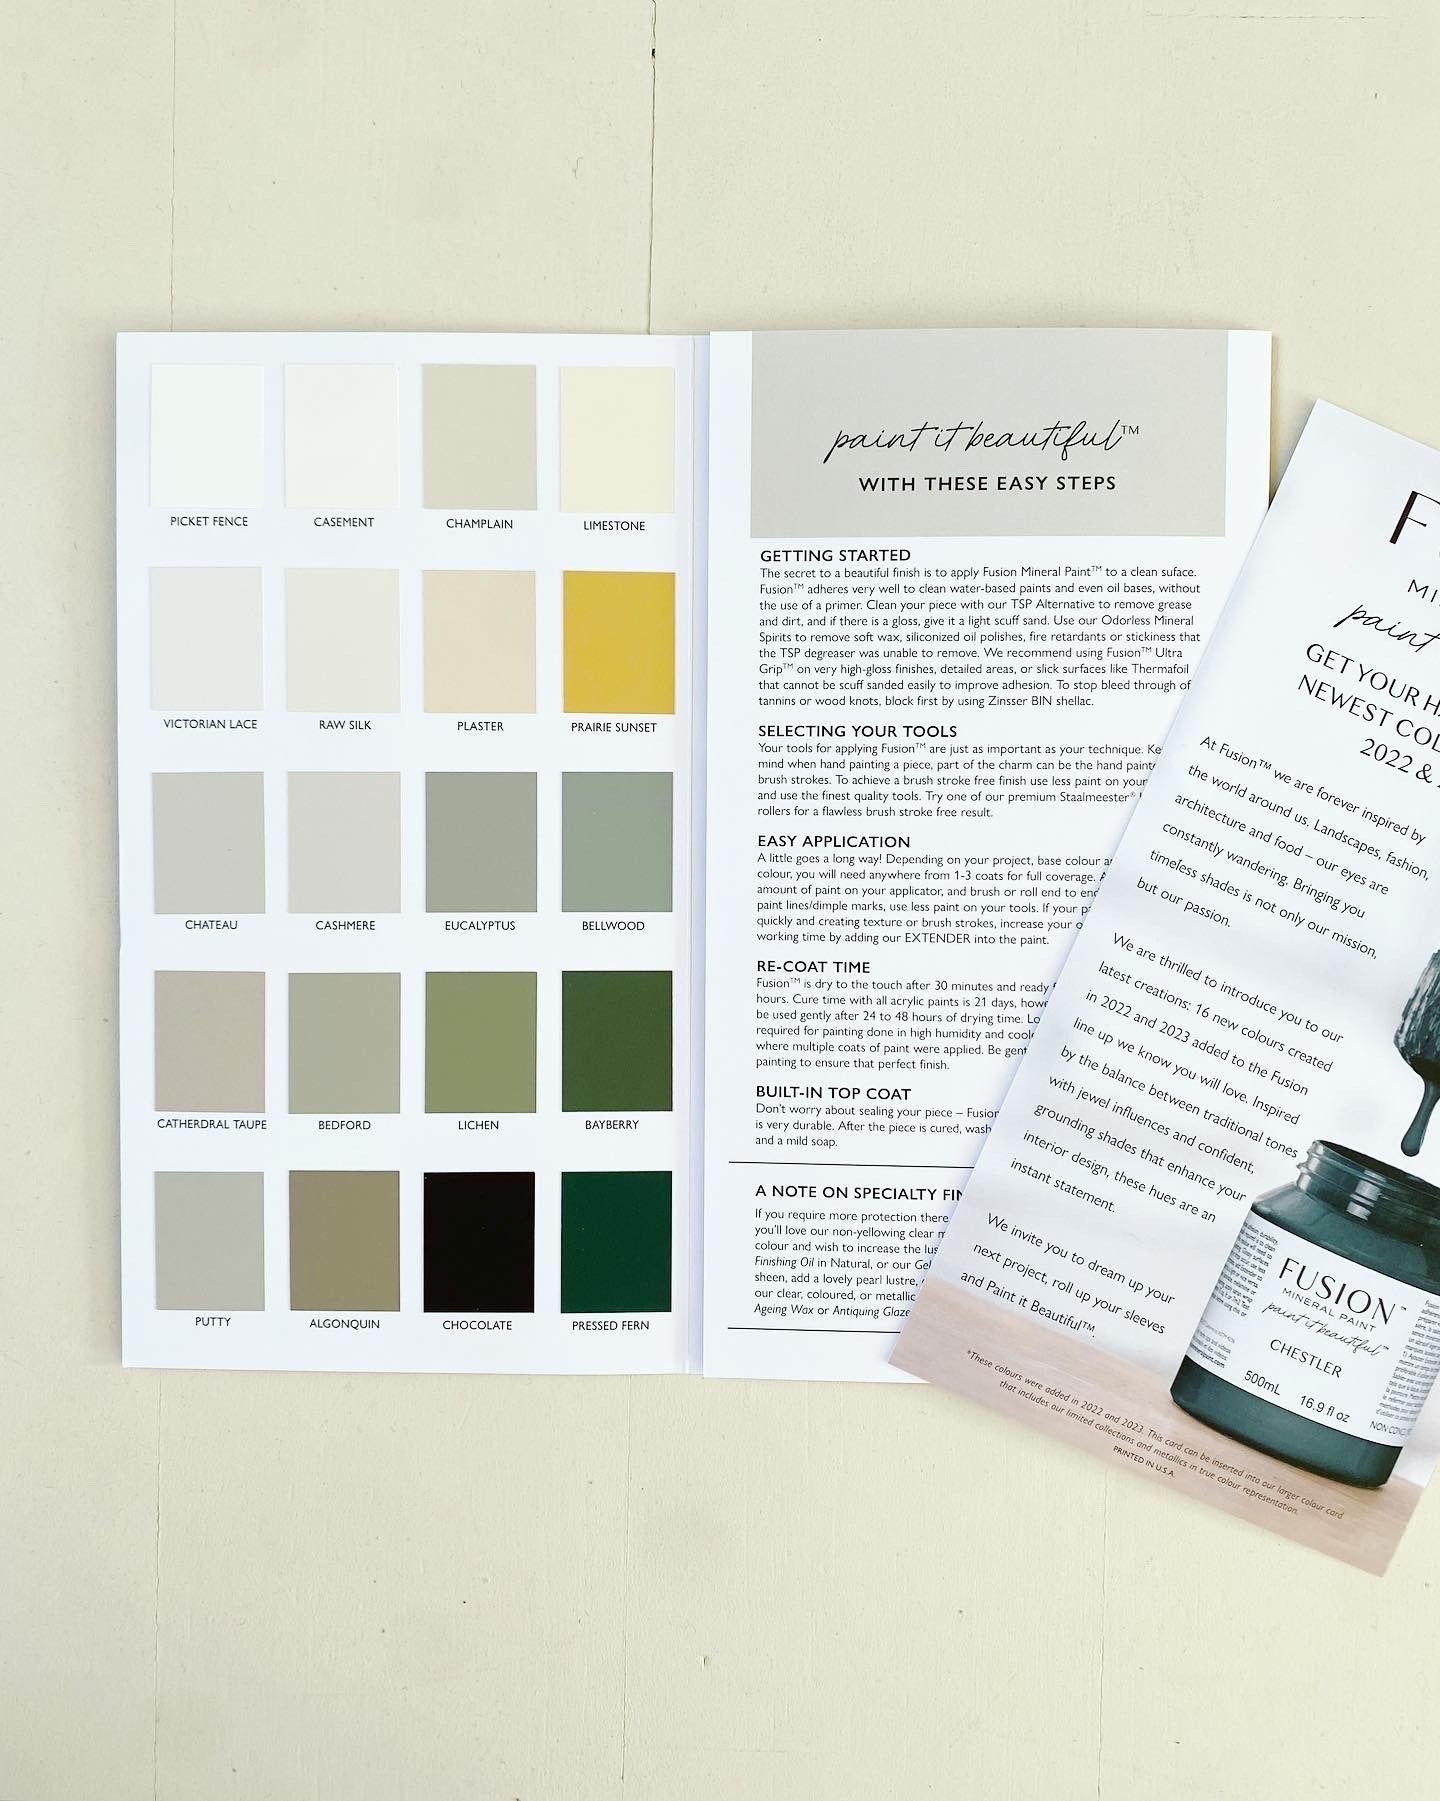 Fusion mineral paint - Farvekort "true to color"